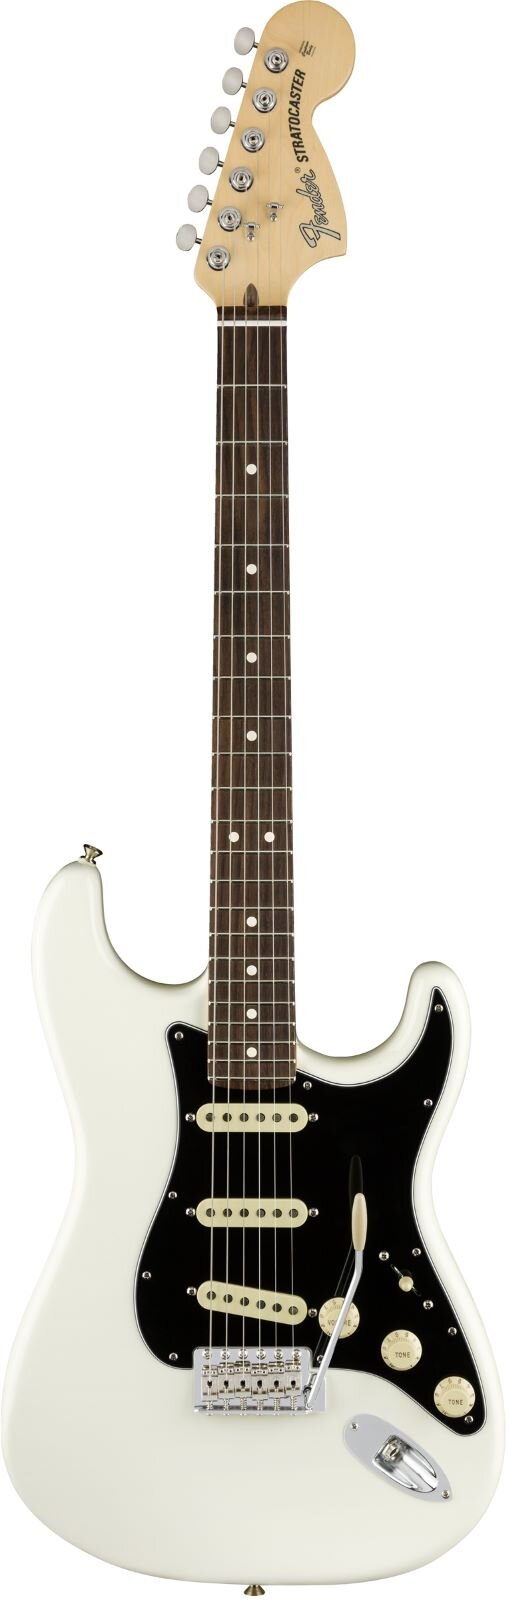 Fender American Performer Series Stratocaster Rosewood Fingerboard Arctic White : photo 1